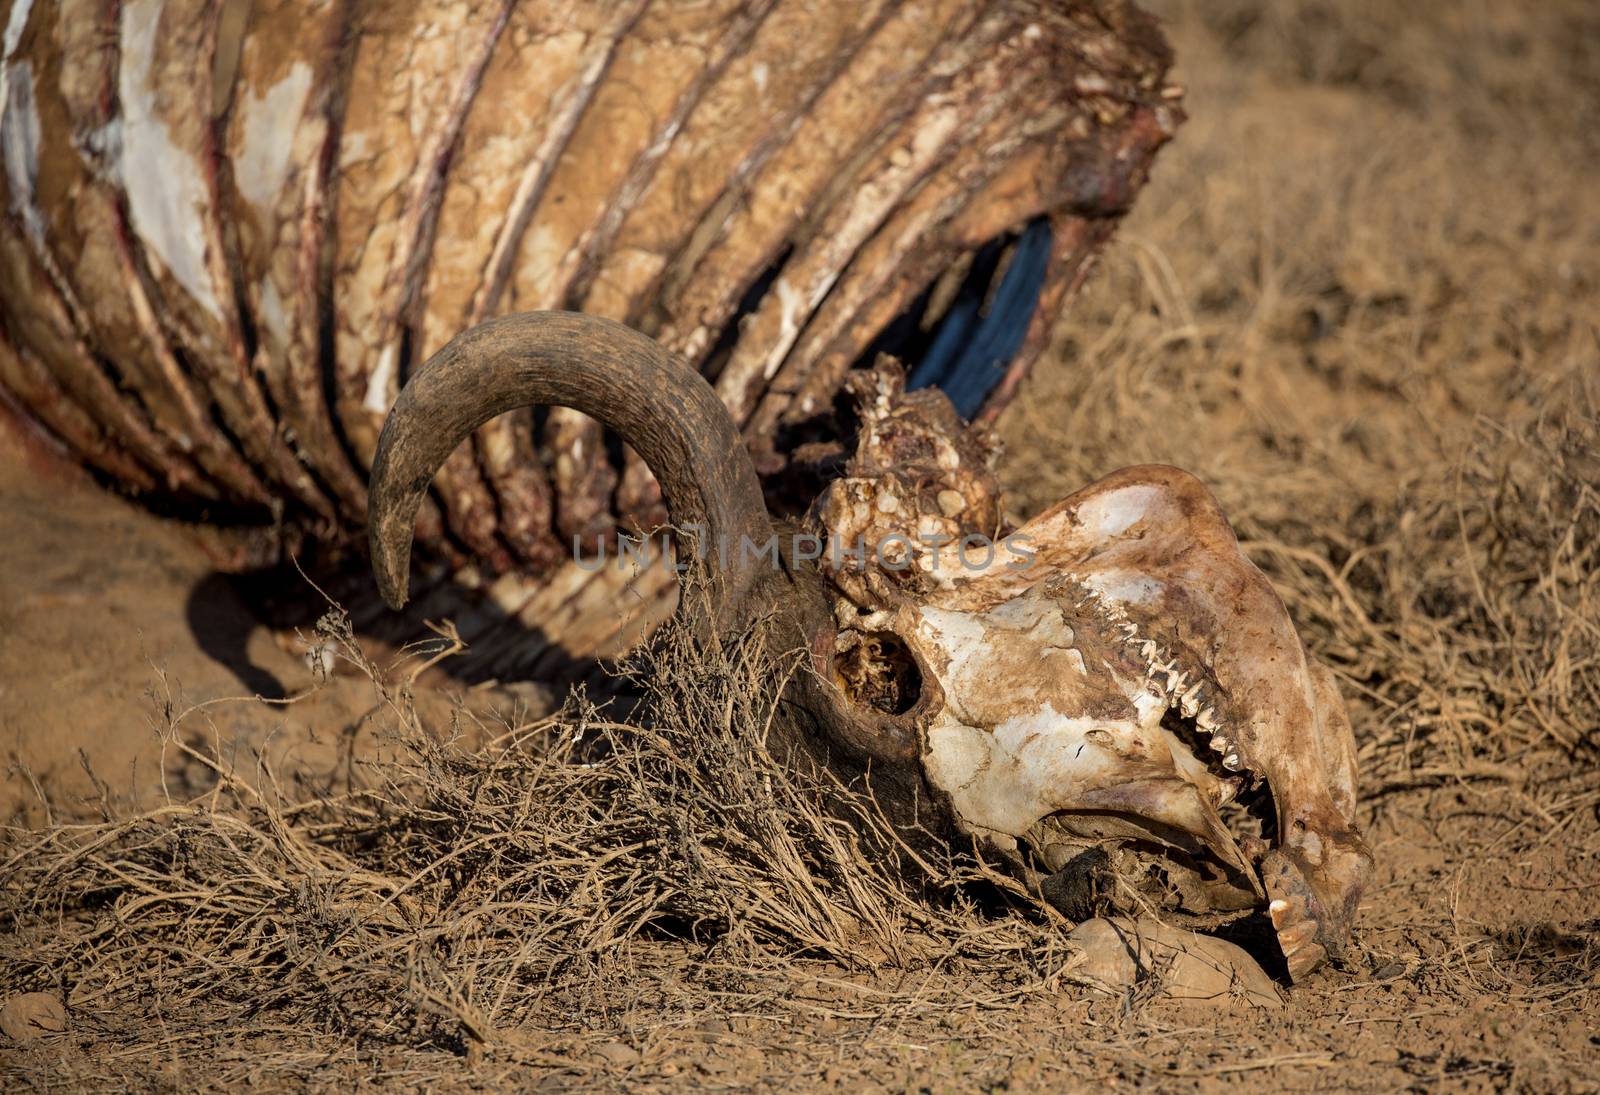 Skelton showing teeth of a Cape Buffalo that was caught and eaten by Lions